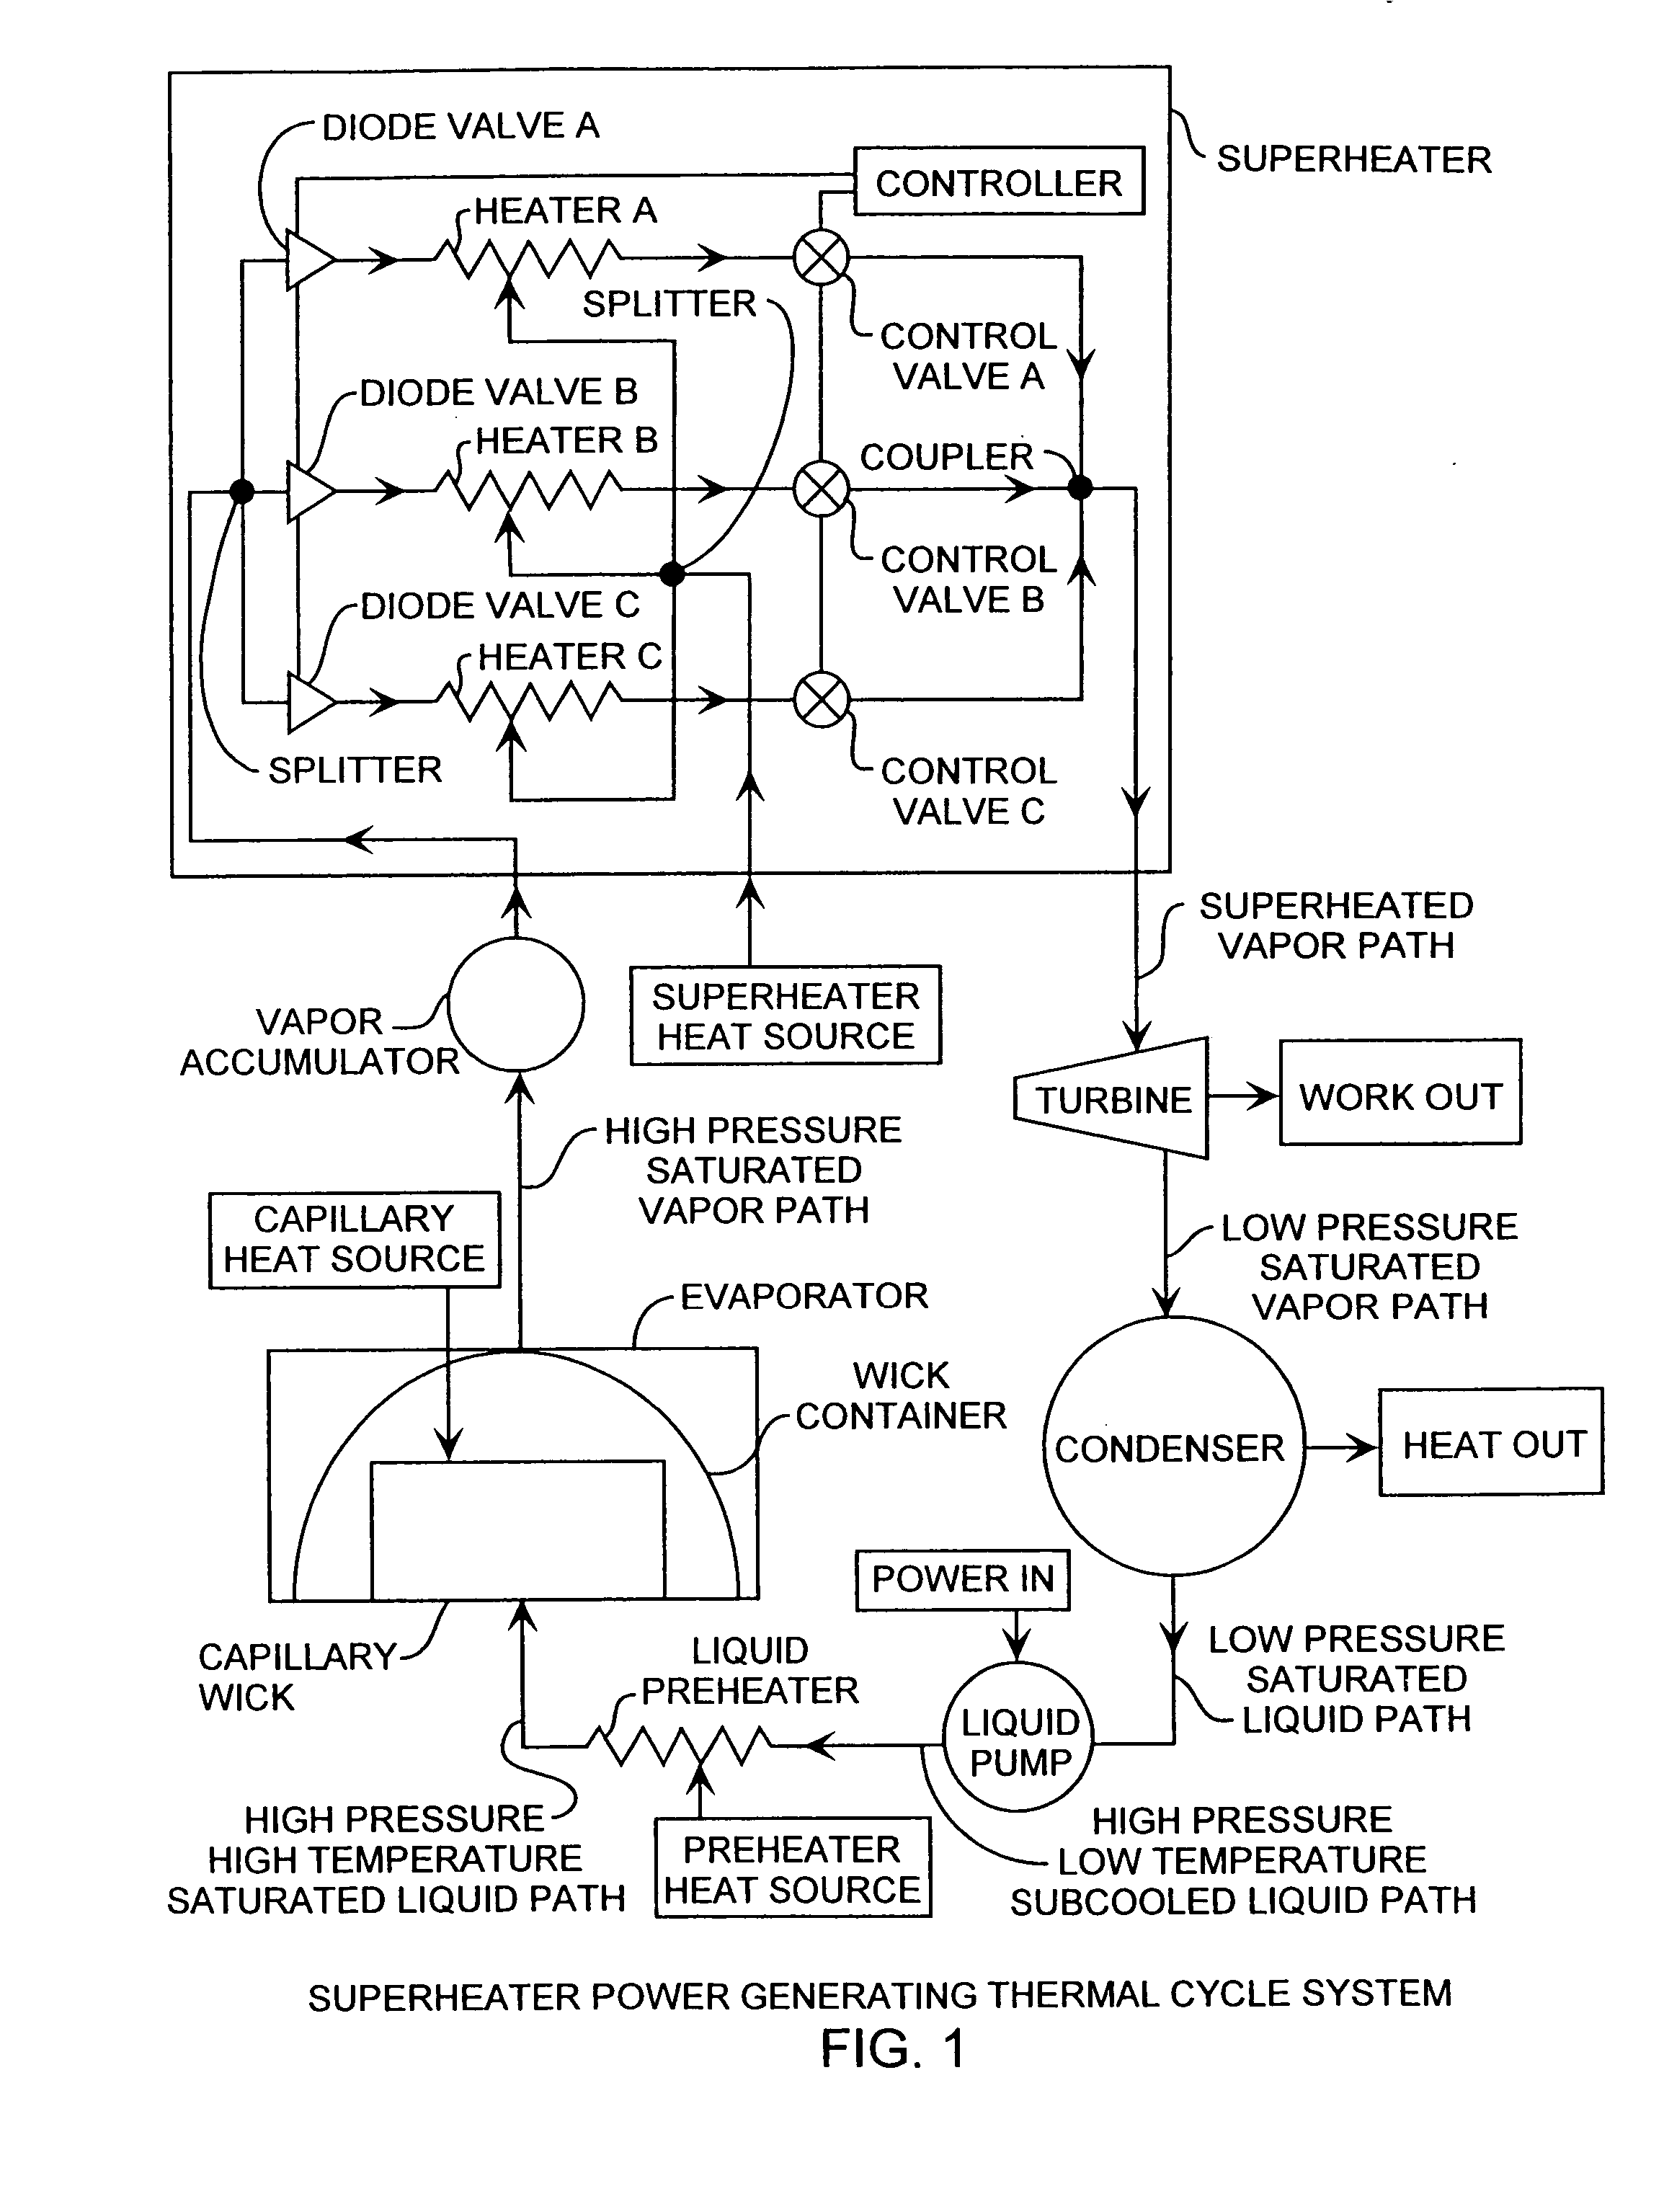 Superheater capillary two-phase thermodynamic power conversion cycle system